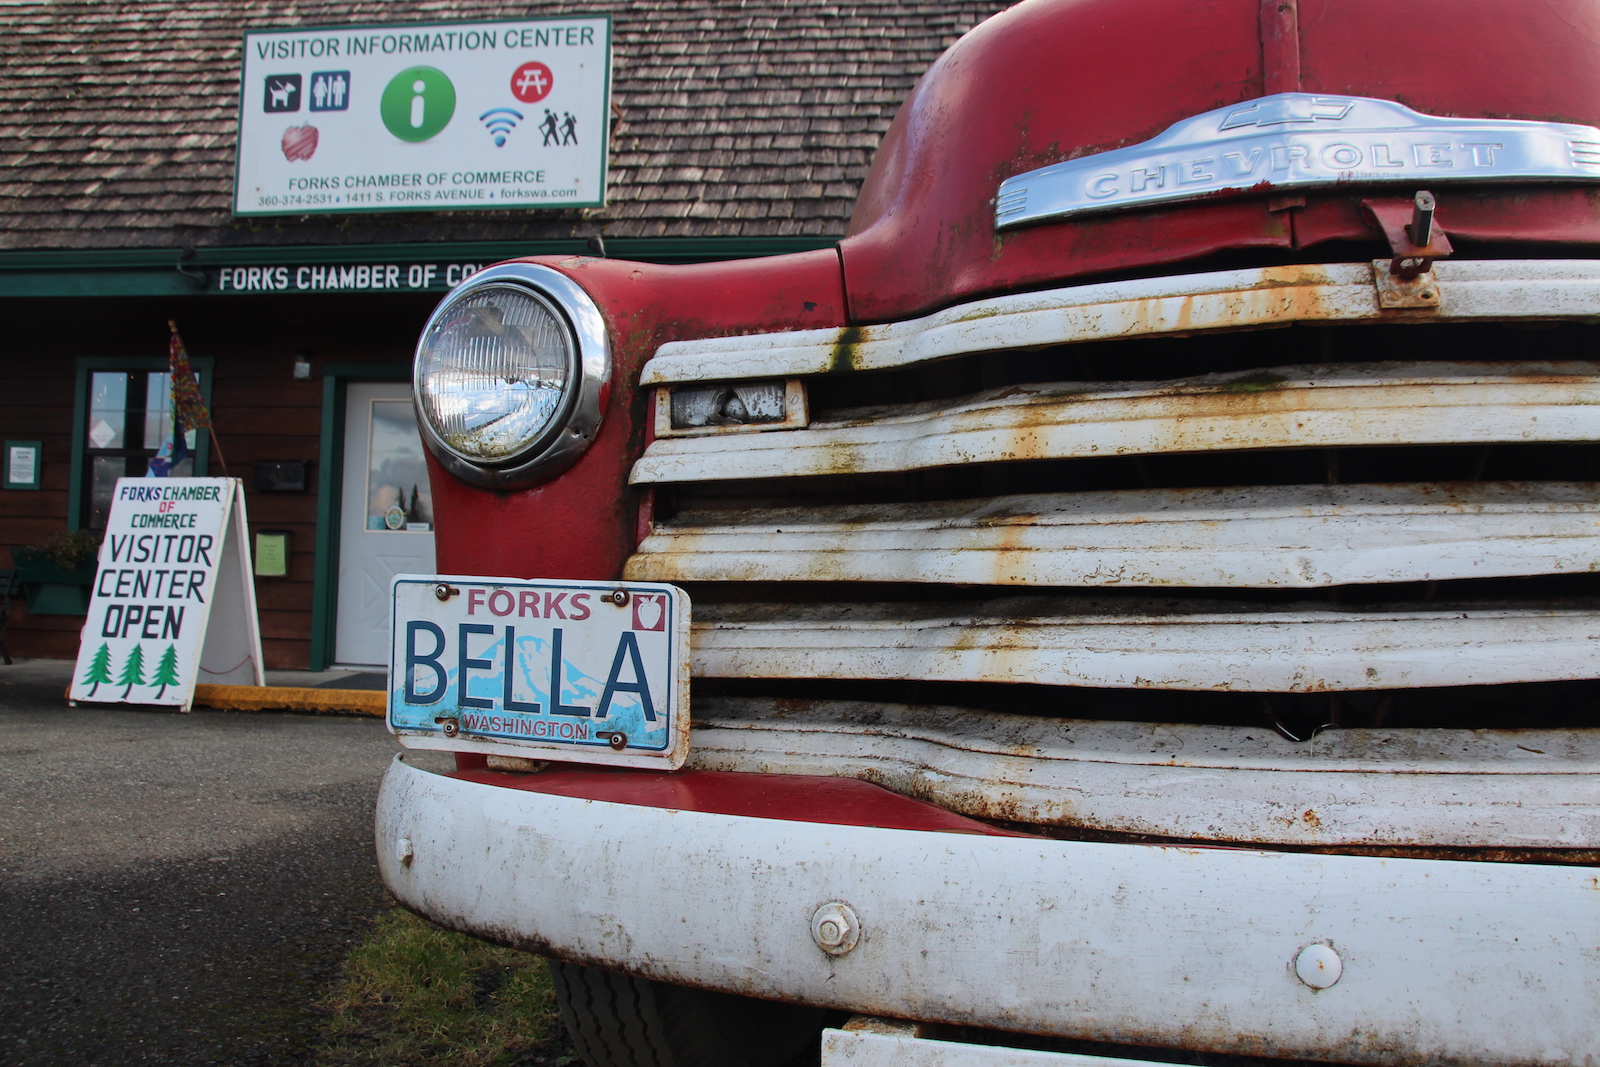 An old red truck with a dirty white grate and a license plate that says BELLA is parked in front of a building with a sign marked visitor's center